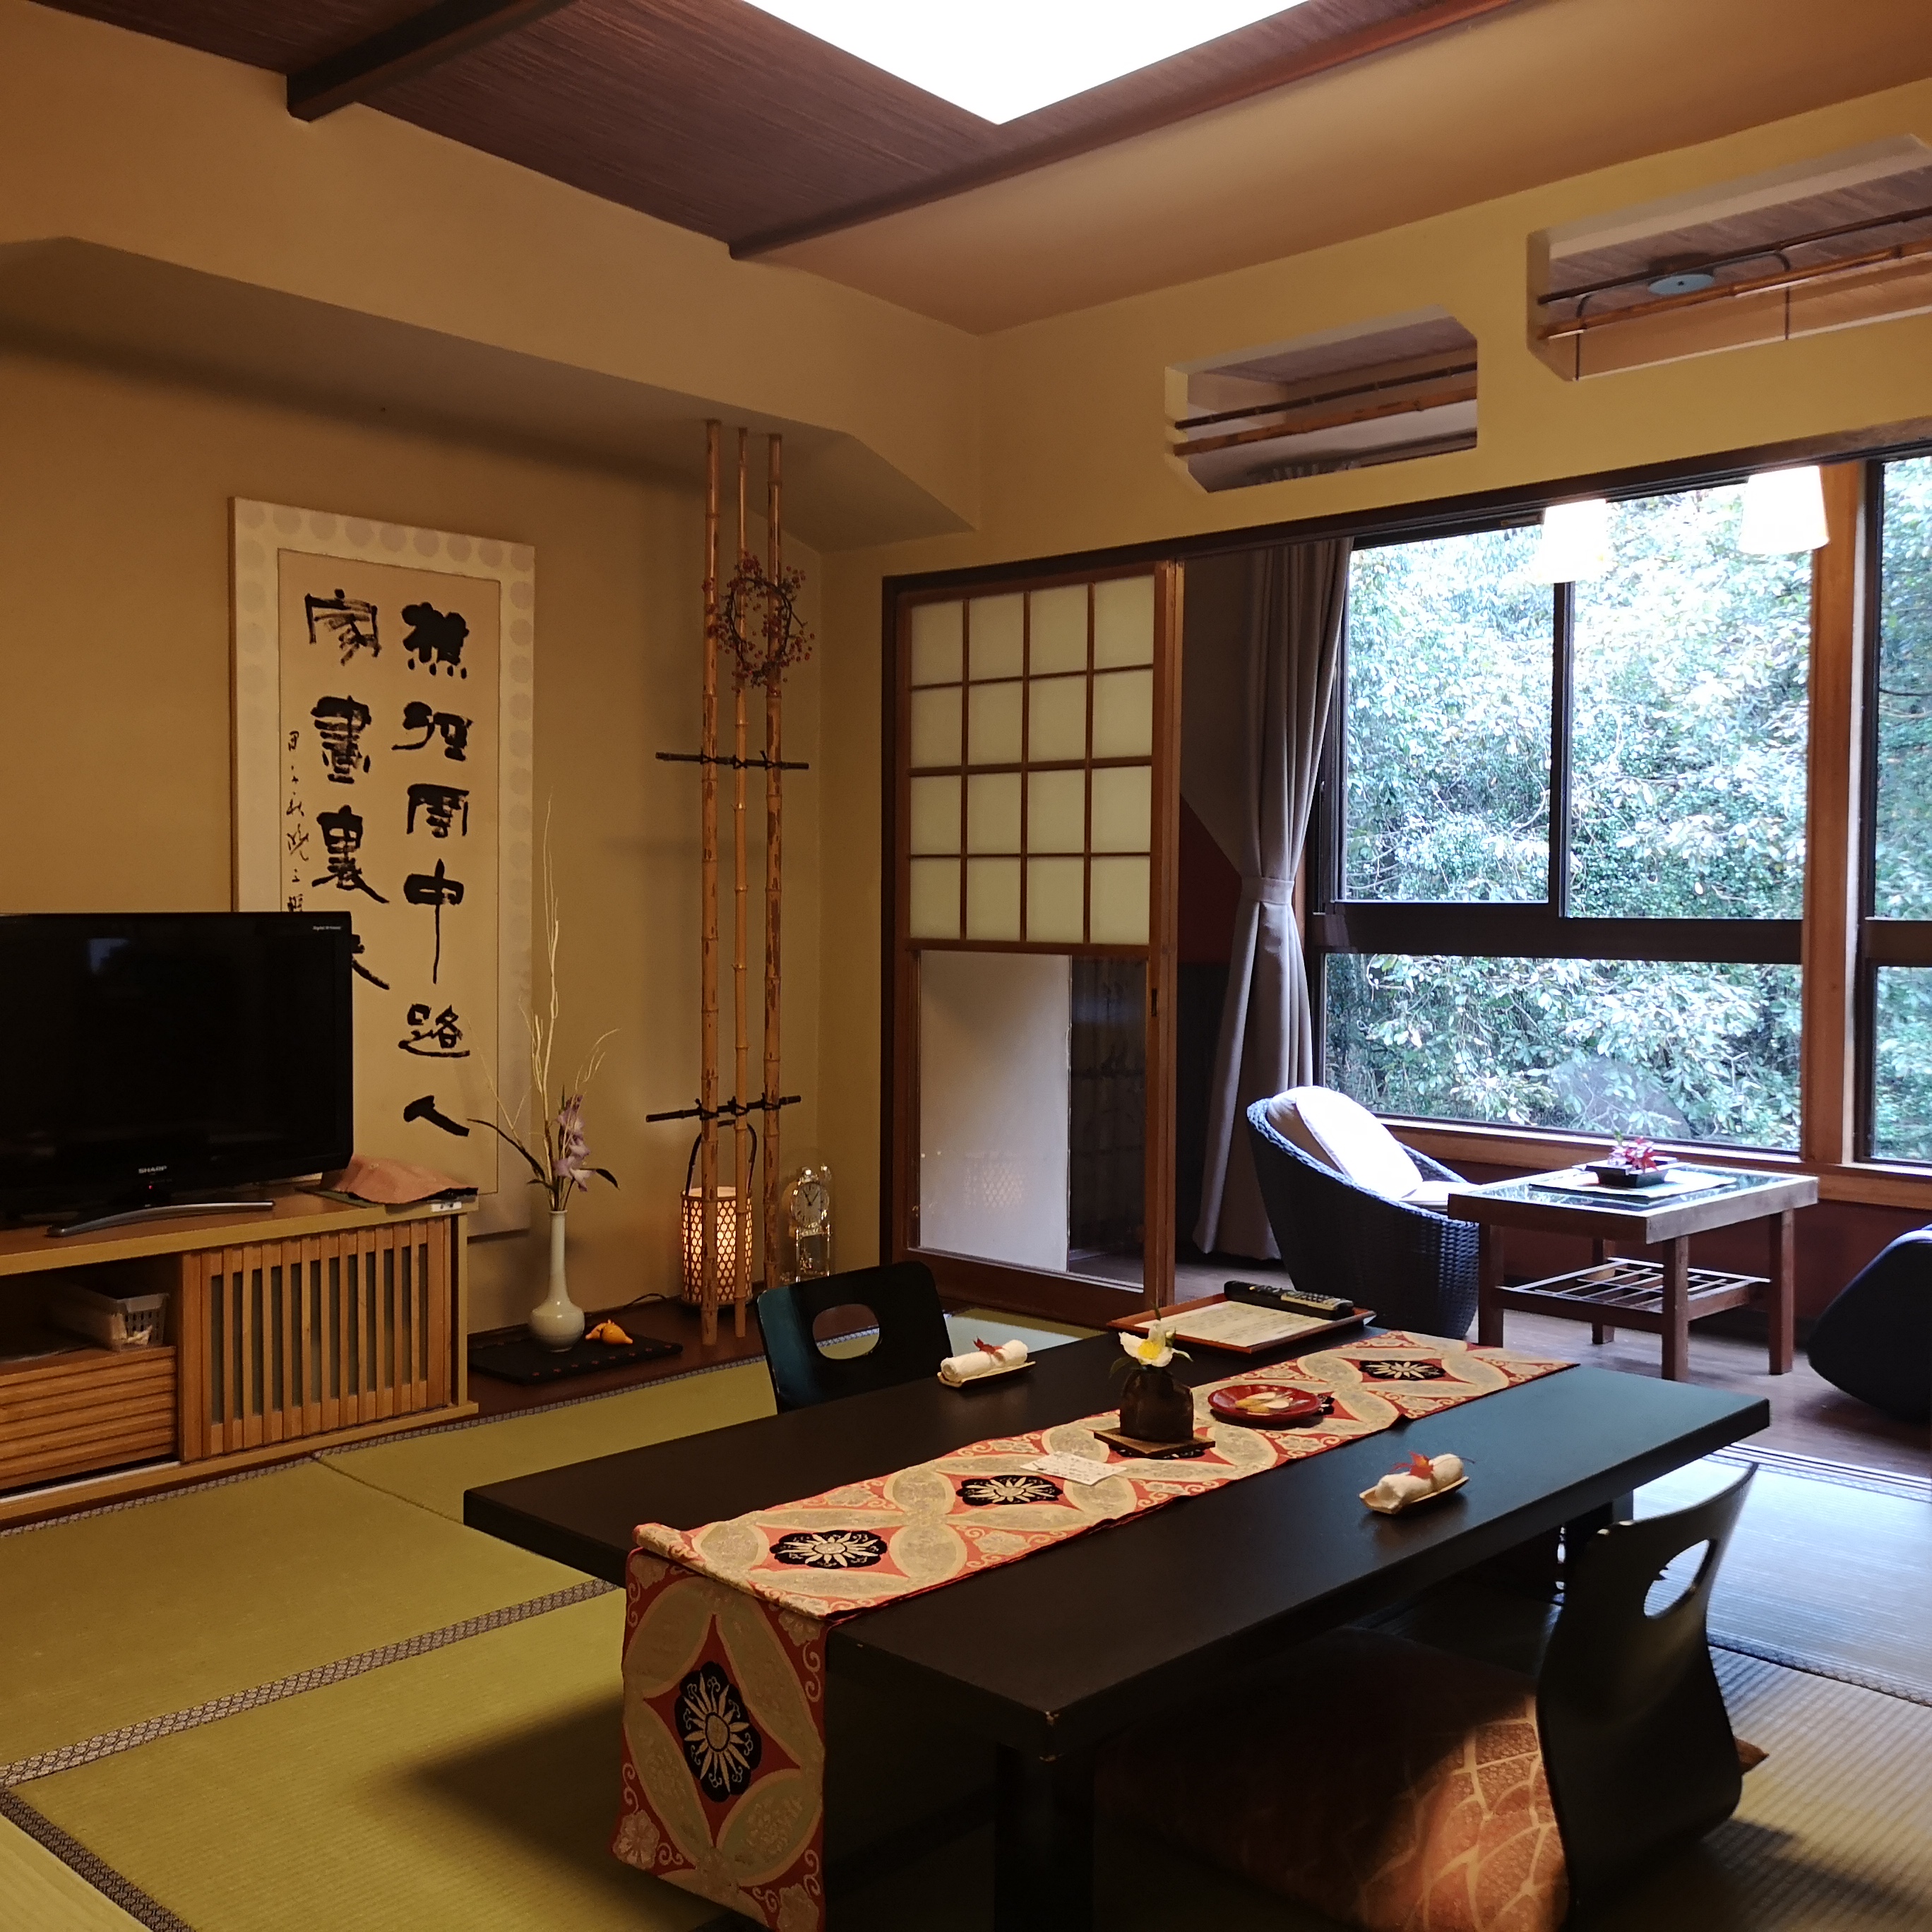 A quiet Japanese room overlooking the mountain stream